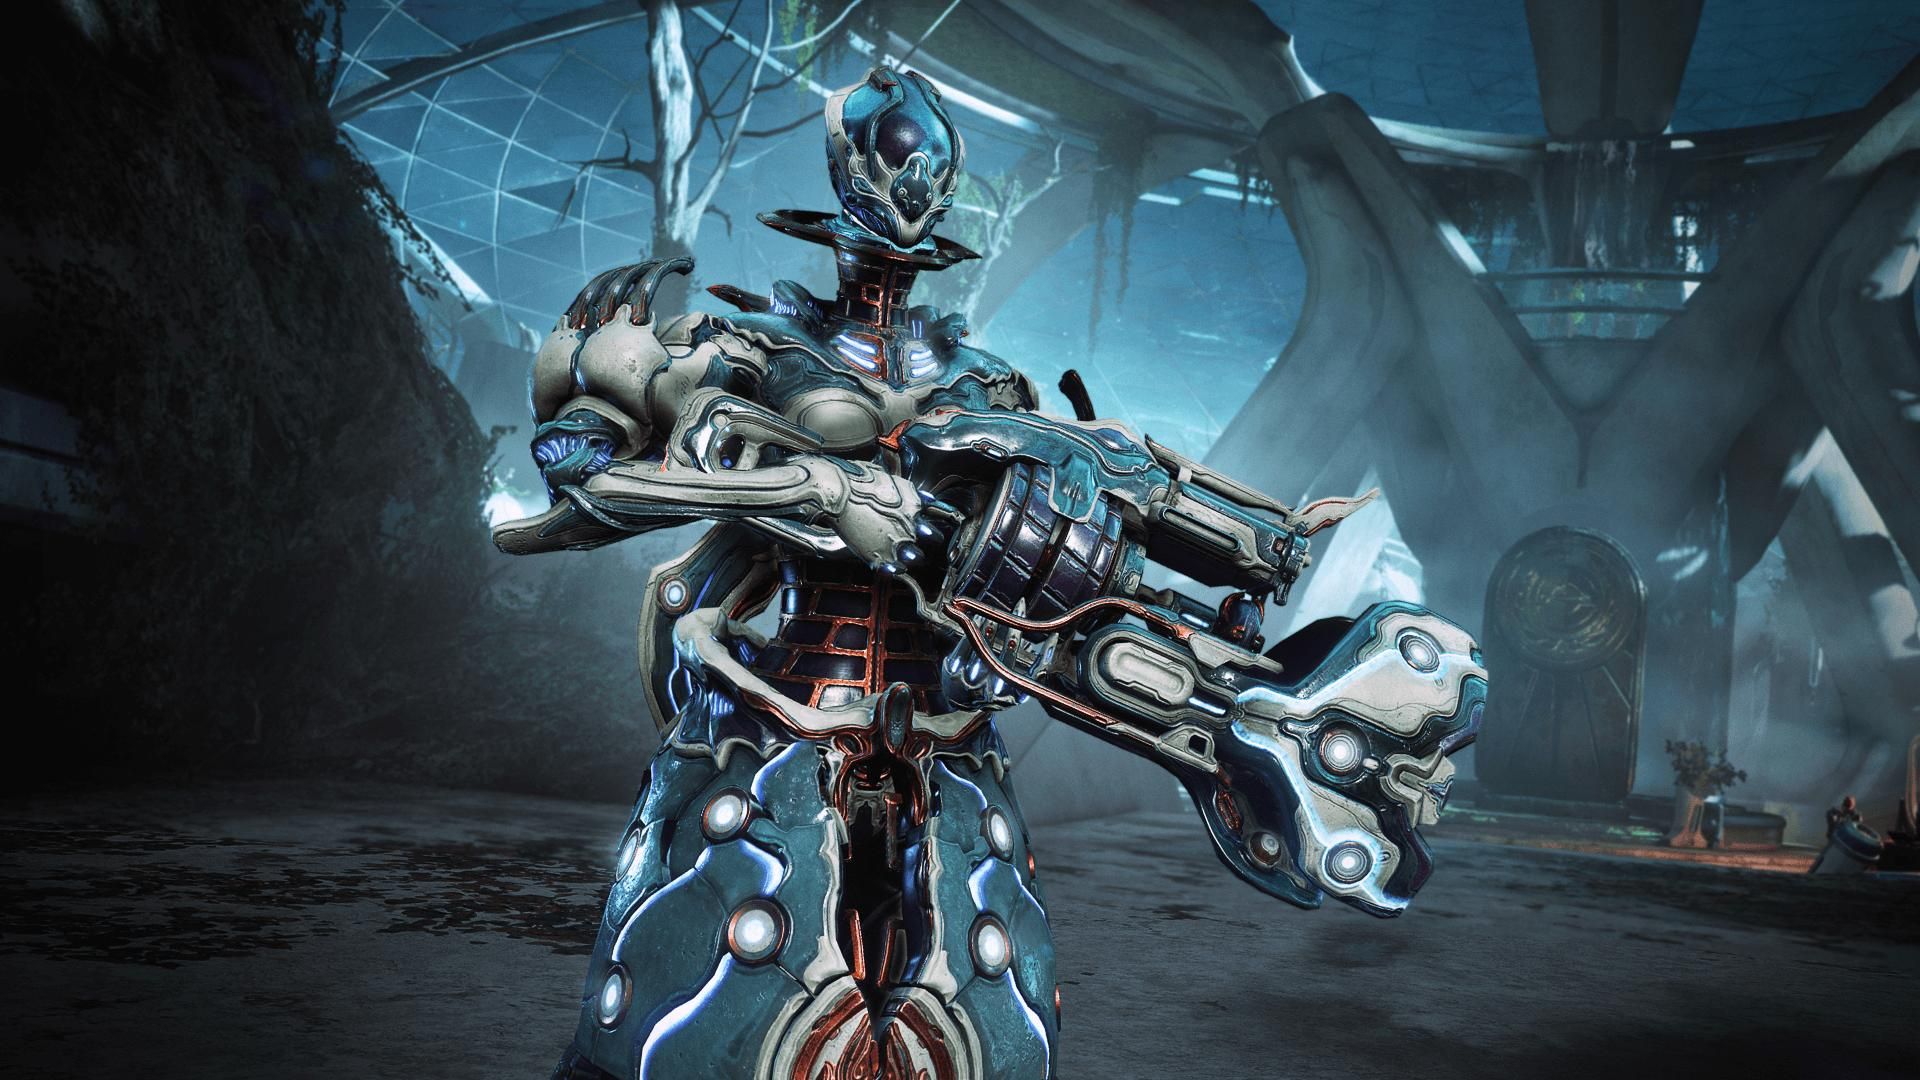 Let's Play Warframe - Build Archon Weapons - Build the Korumm 